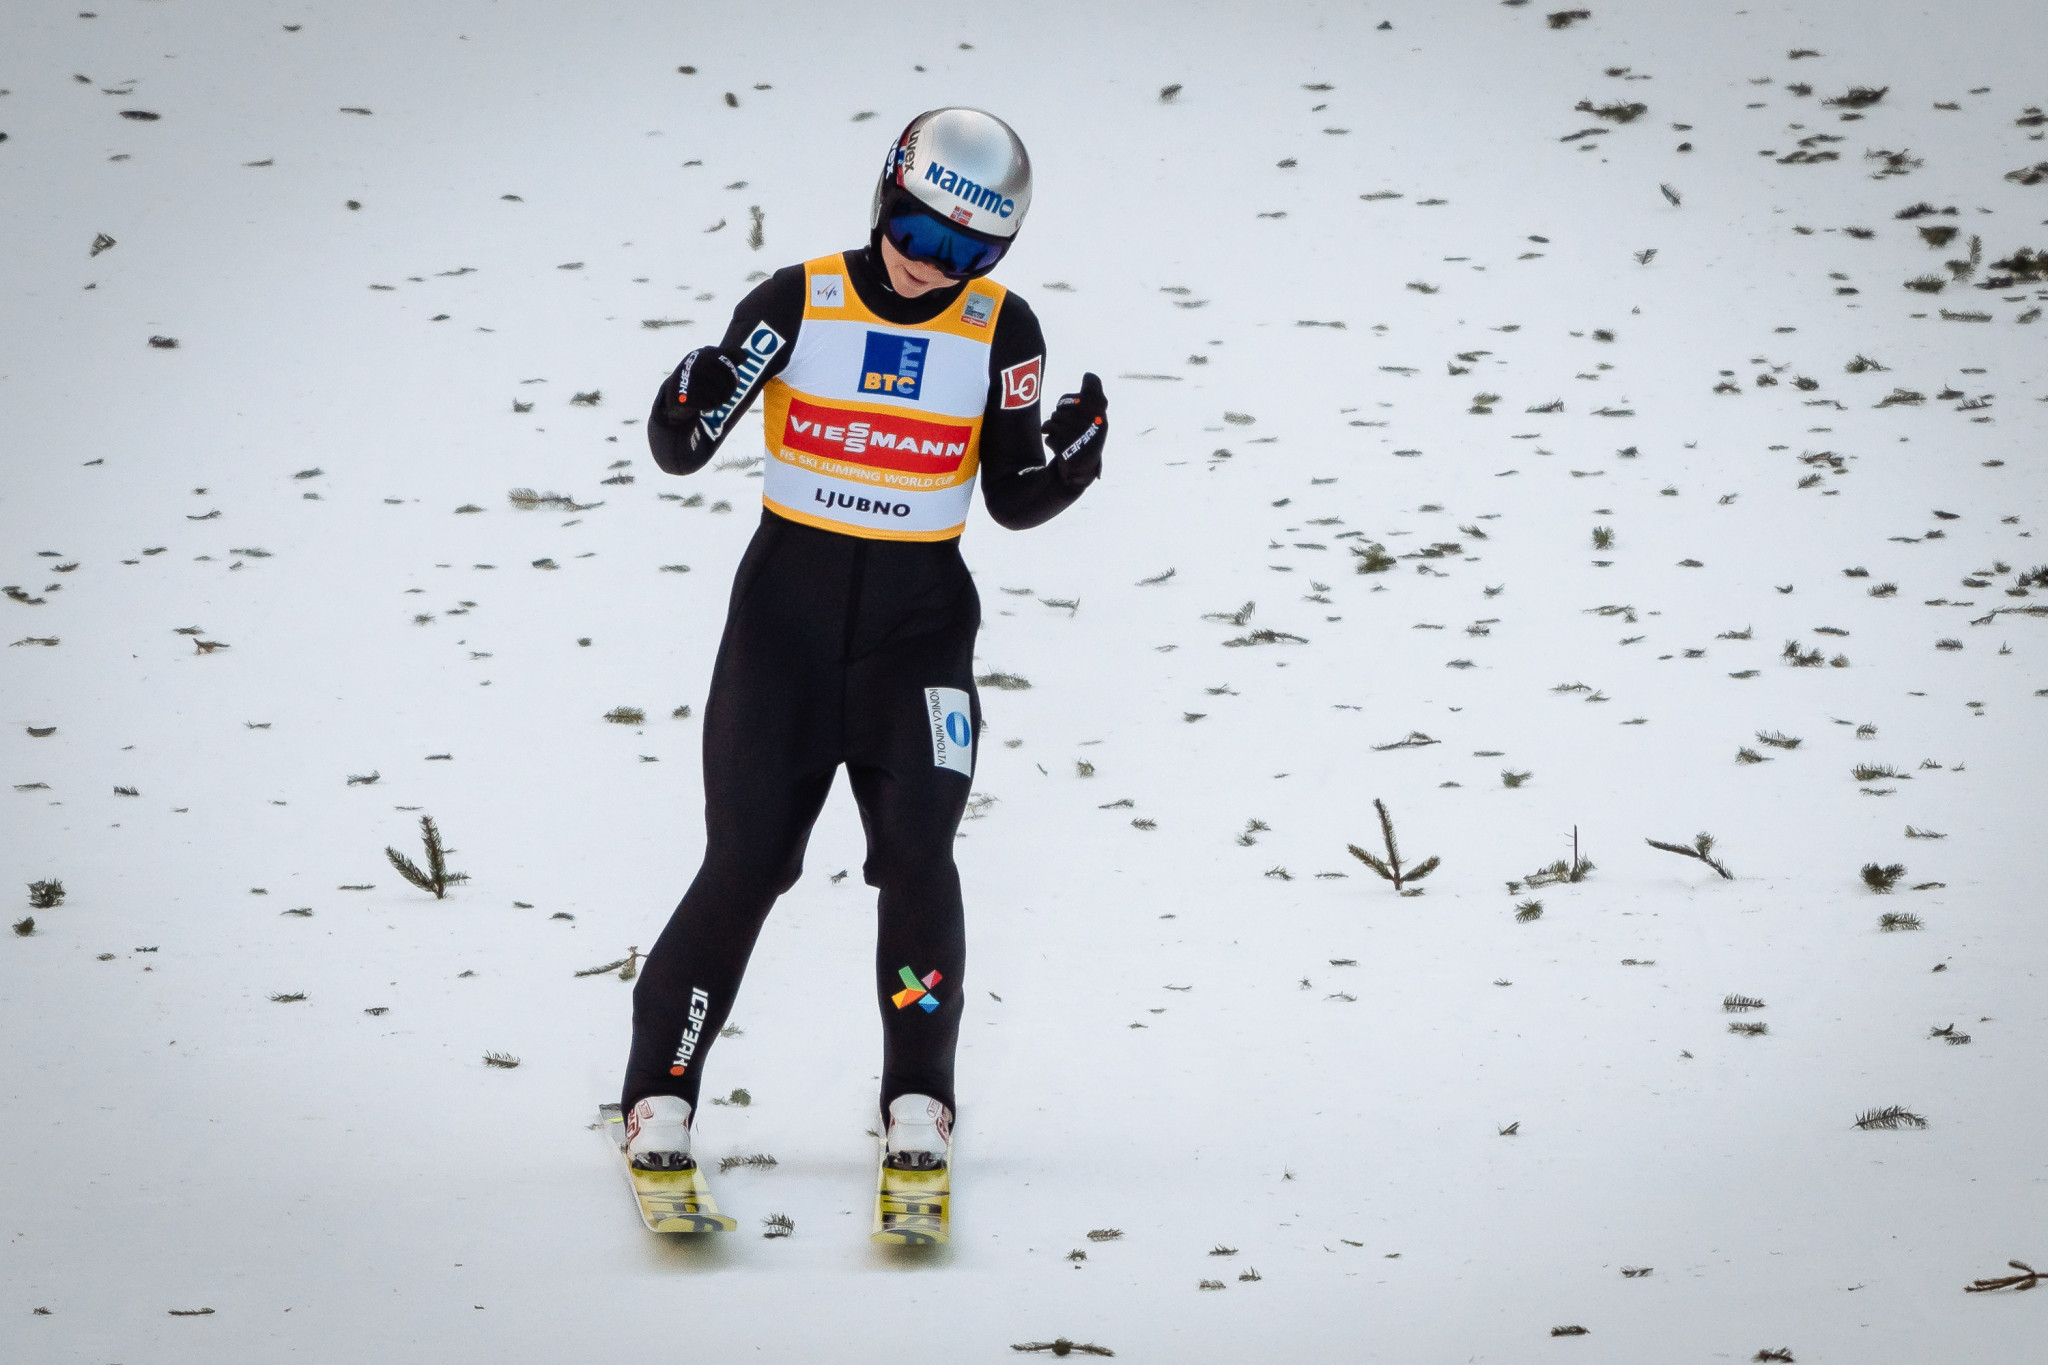 Six of the for Olympic champion Lundby at FIS Ski Jumping World Cup